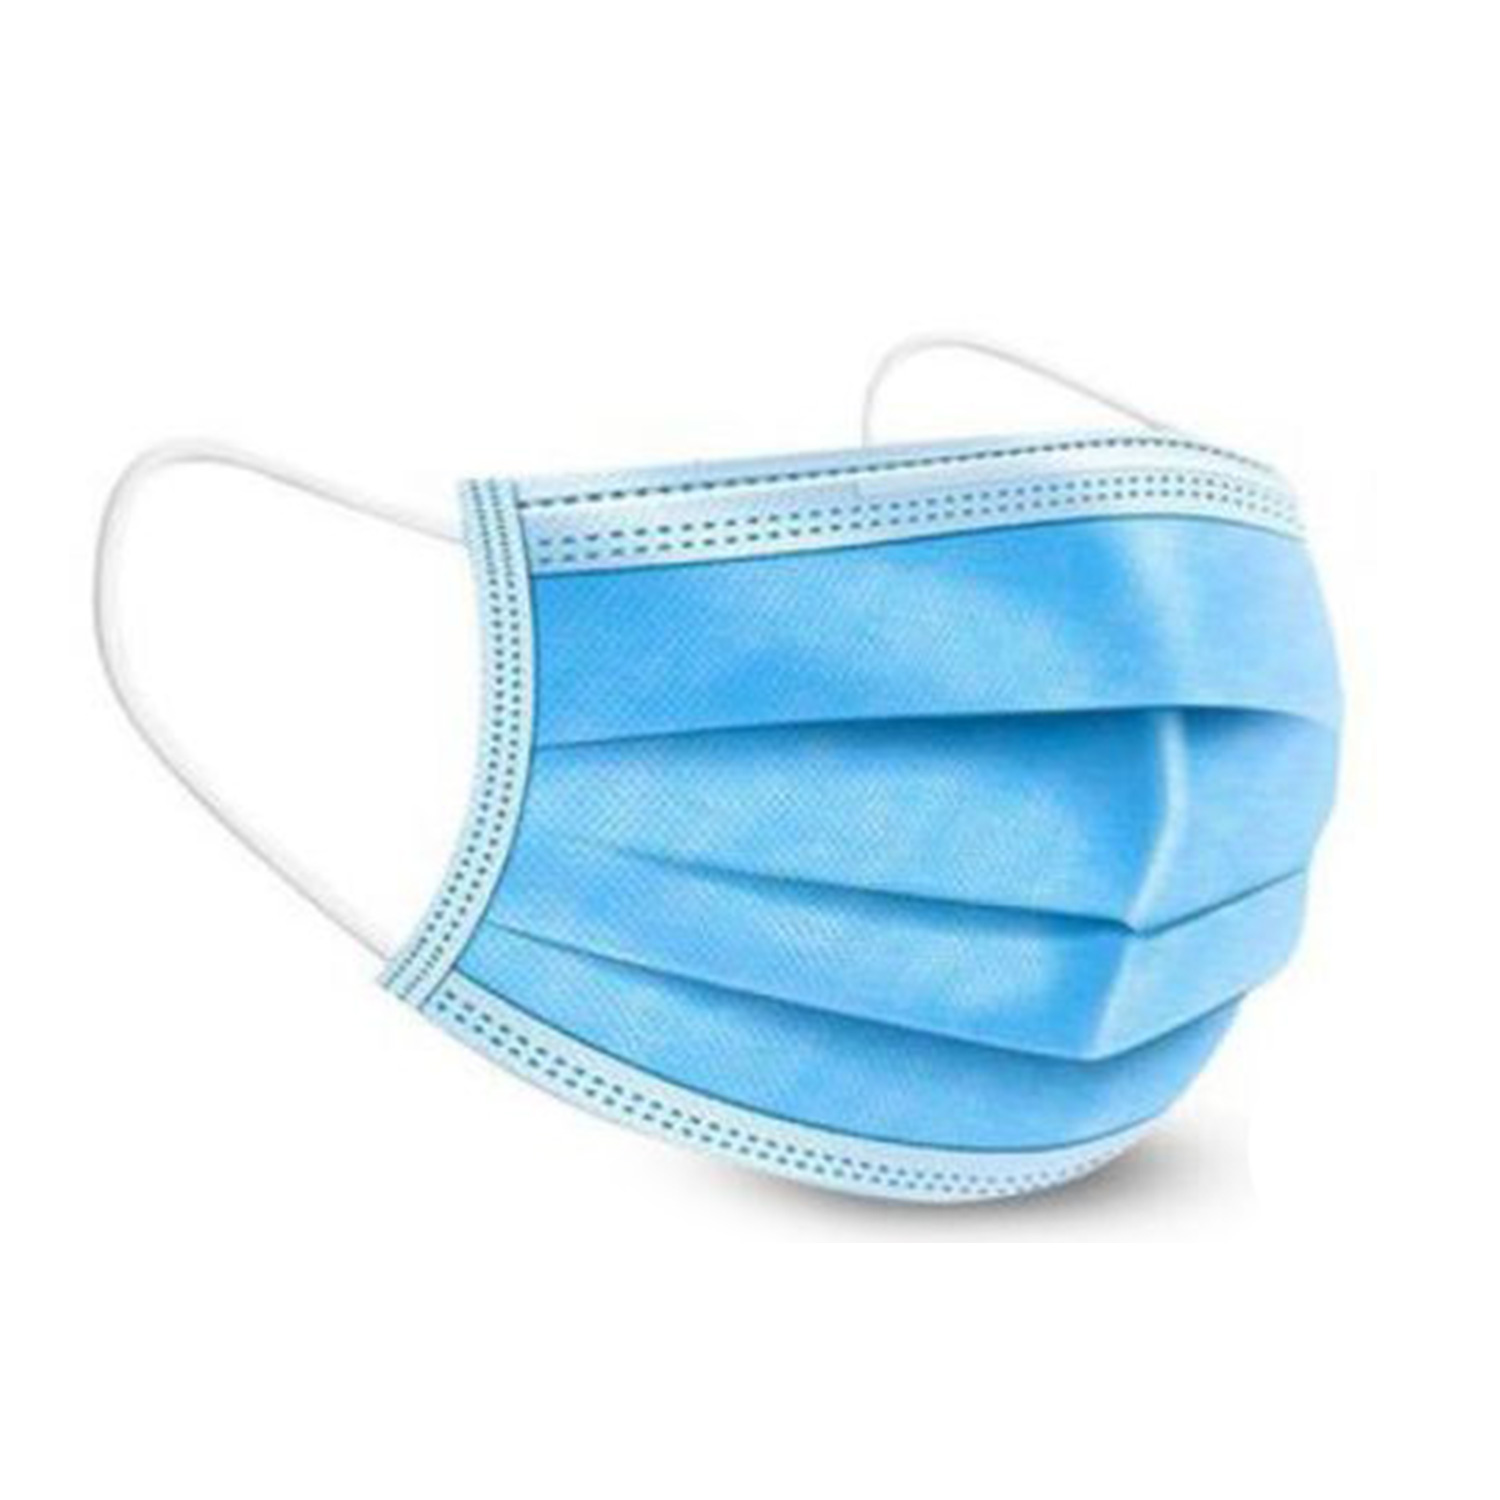 Download 3-Ply Medical Mask (BFE 90%+) | GTHaus